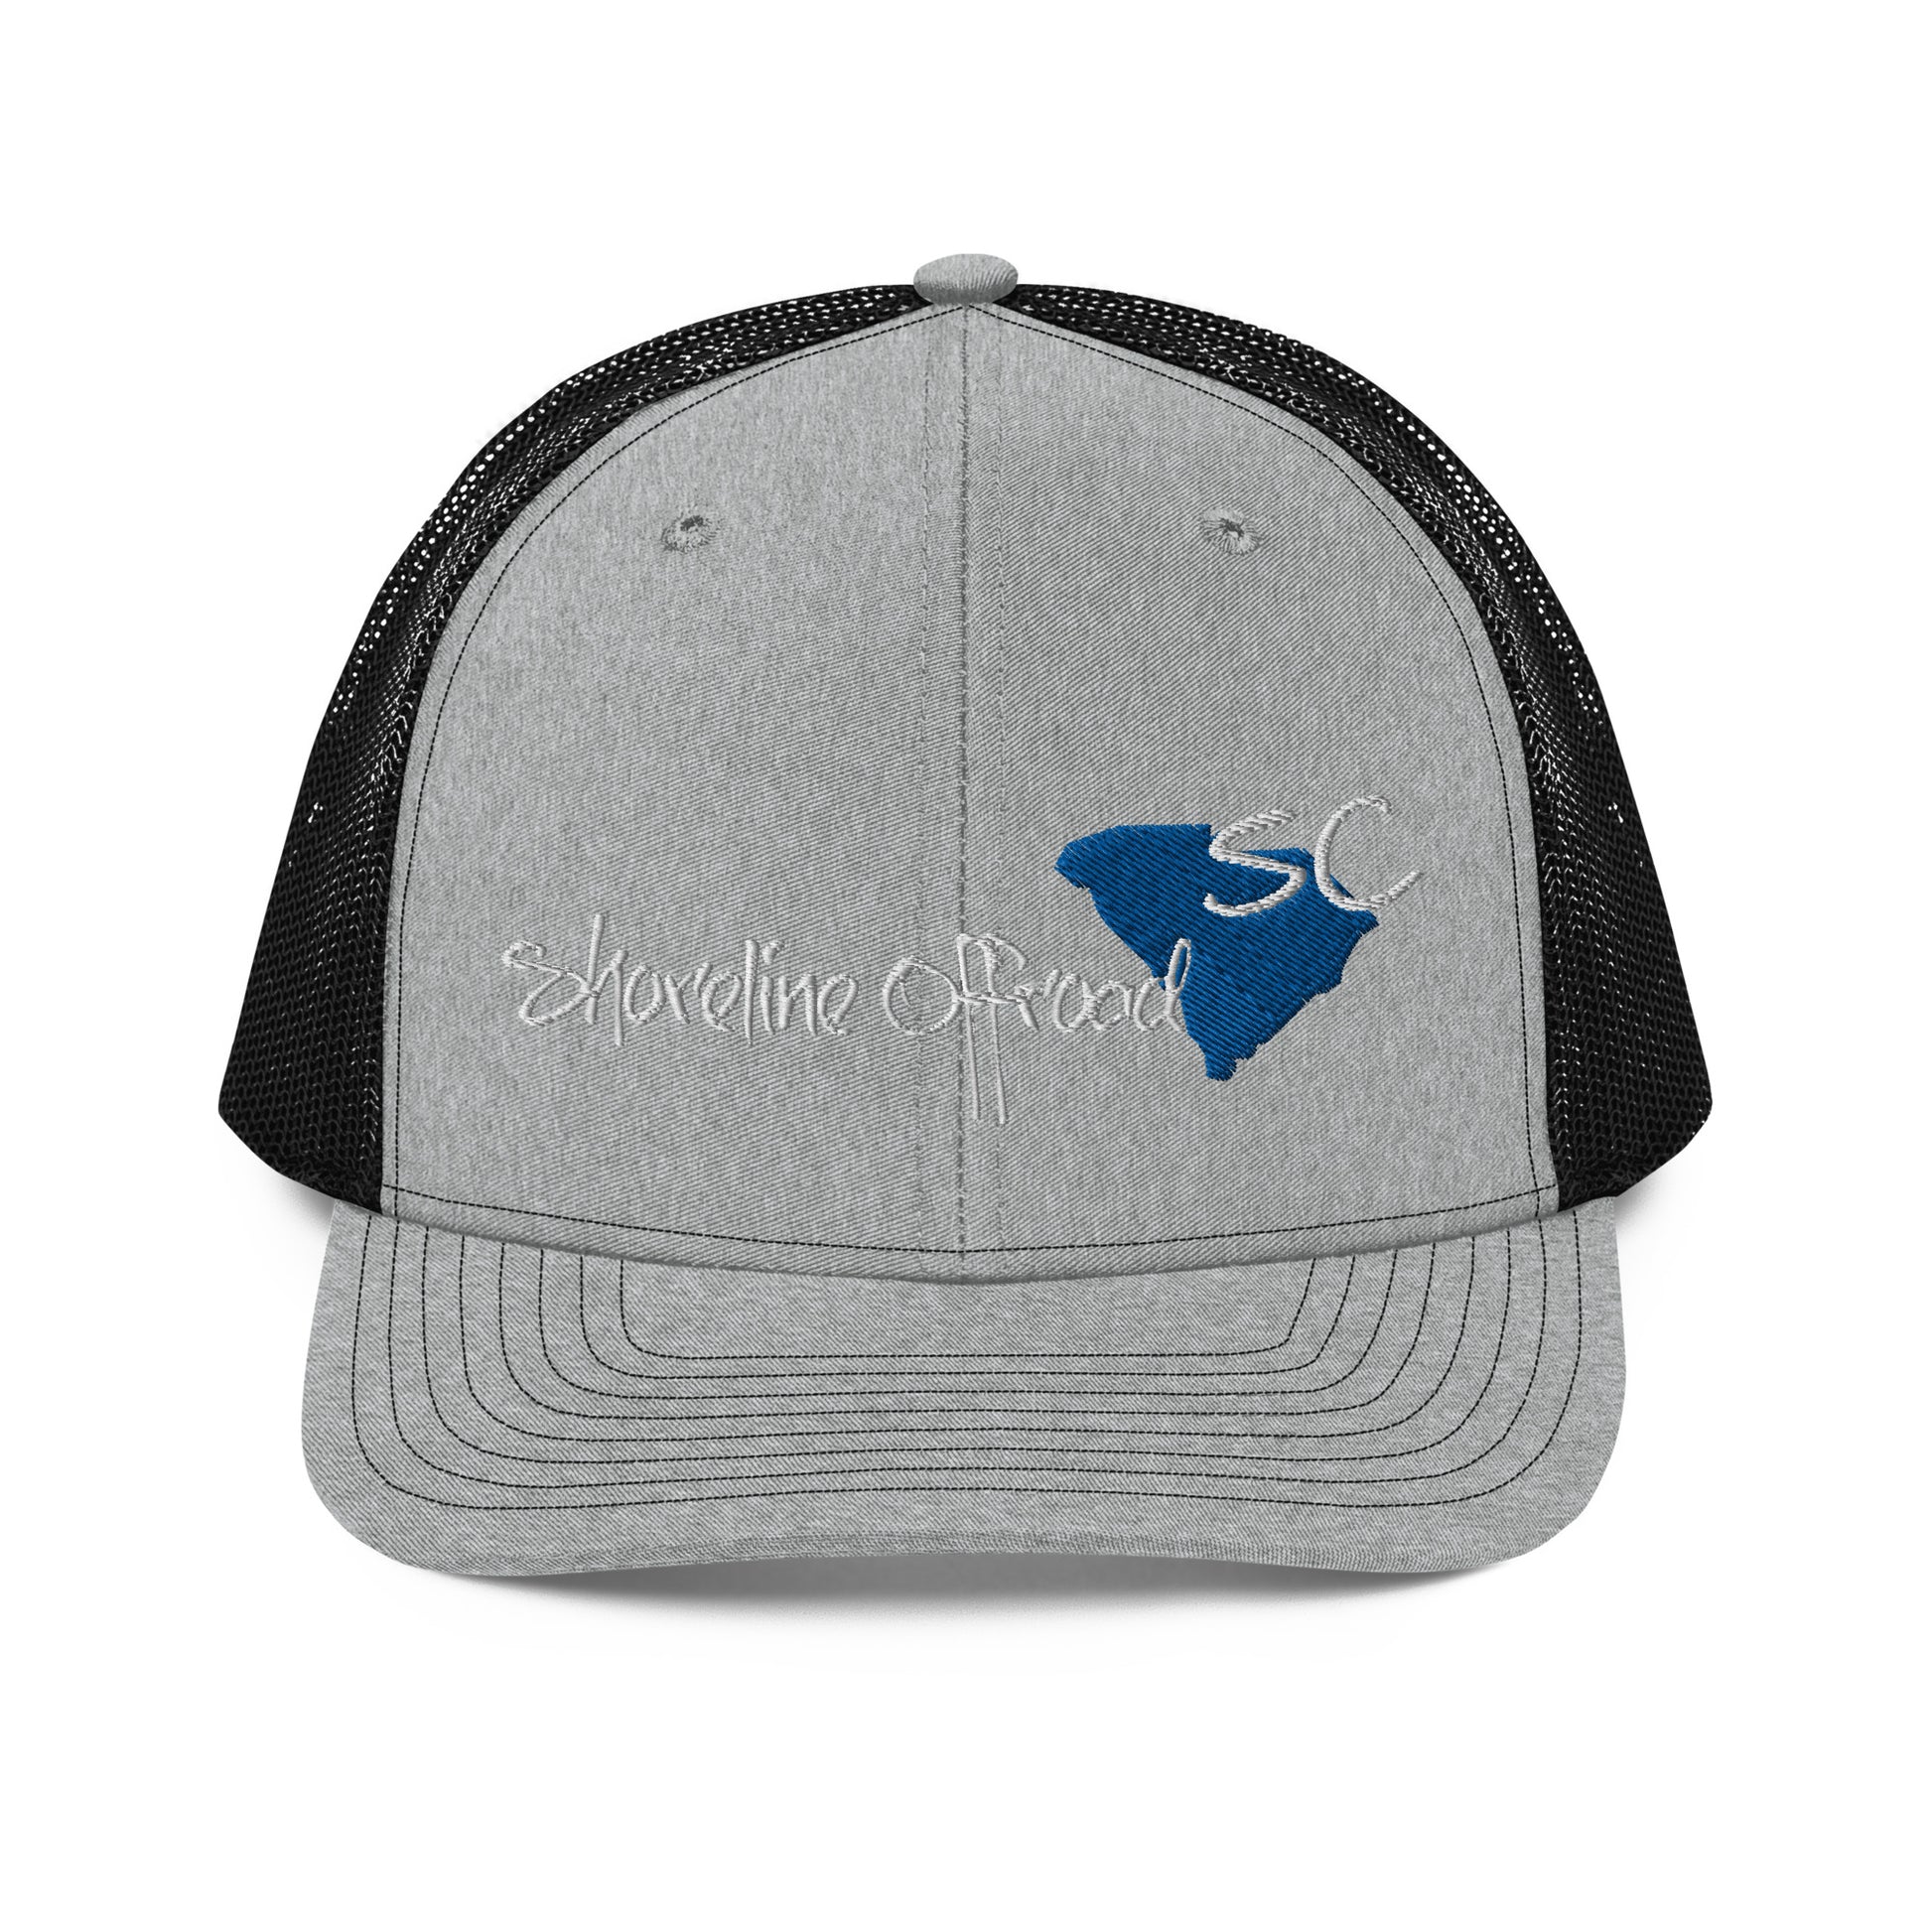 a gray and black trucker hat with the state of south carolina on it